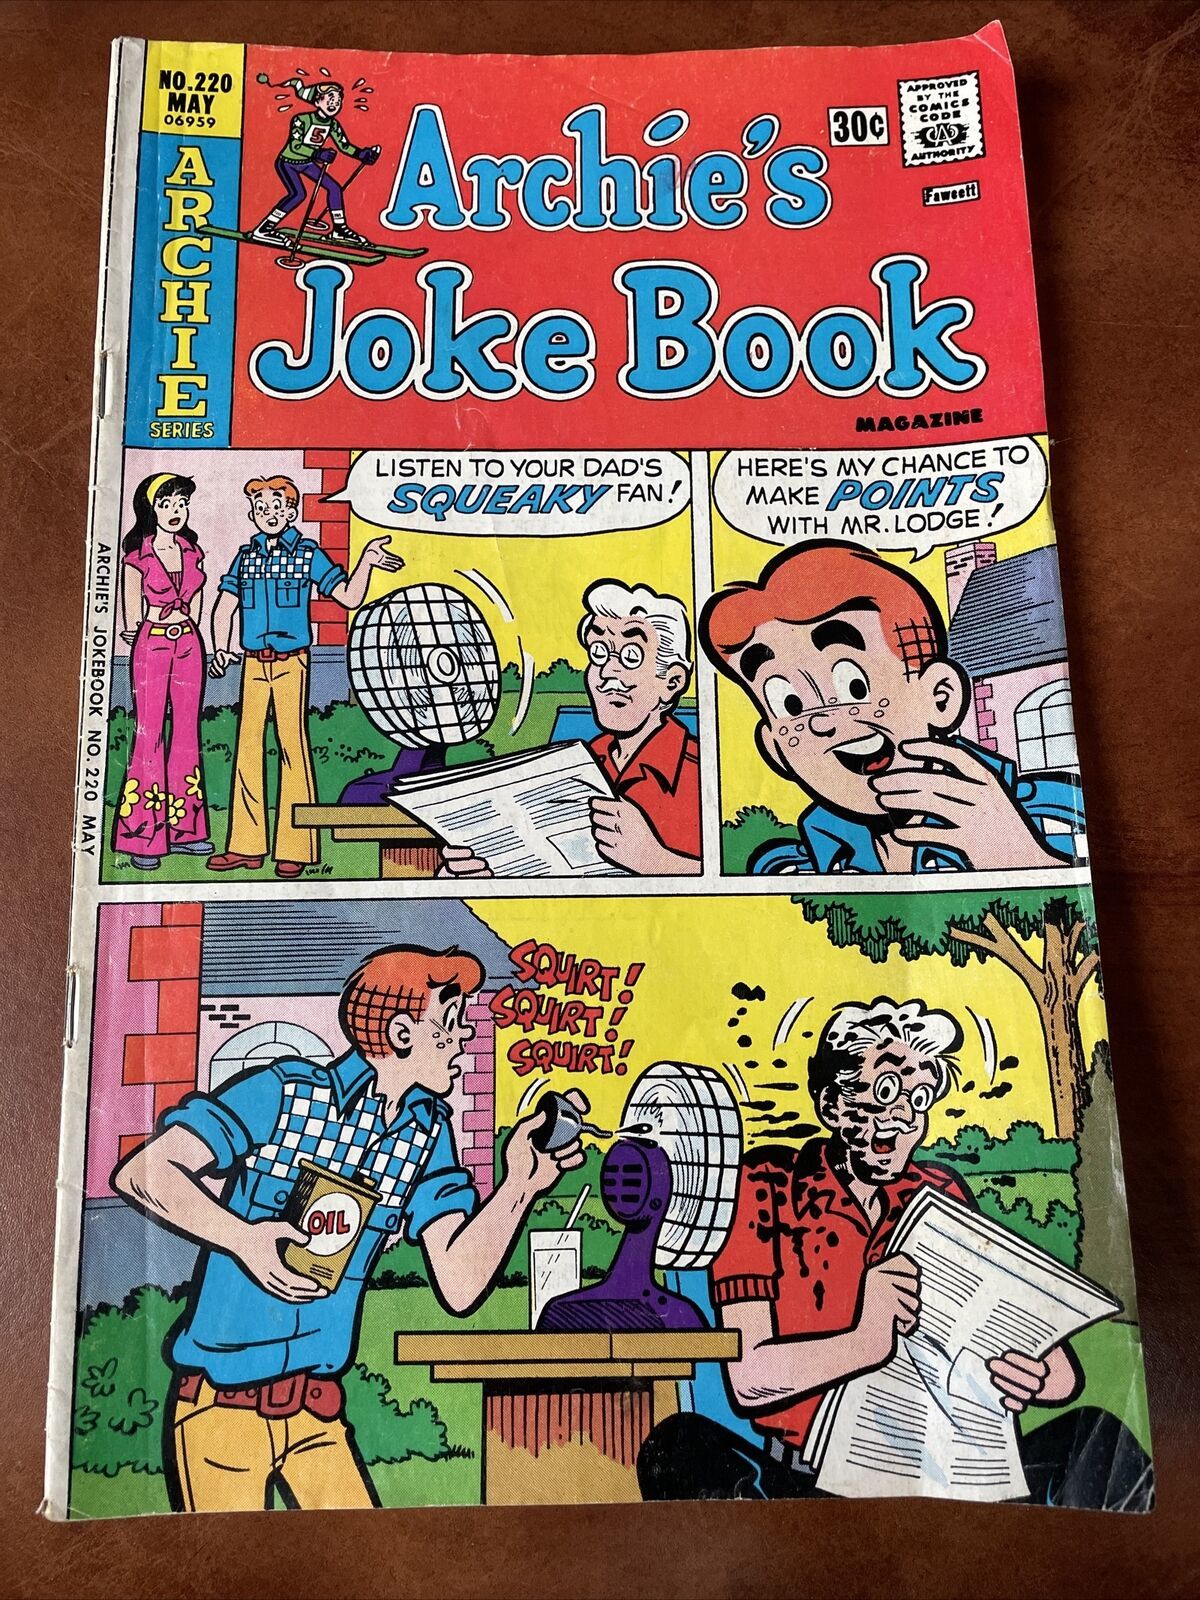 Archie’s Joke Book Issue 220 May 1976 - $8.25